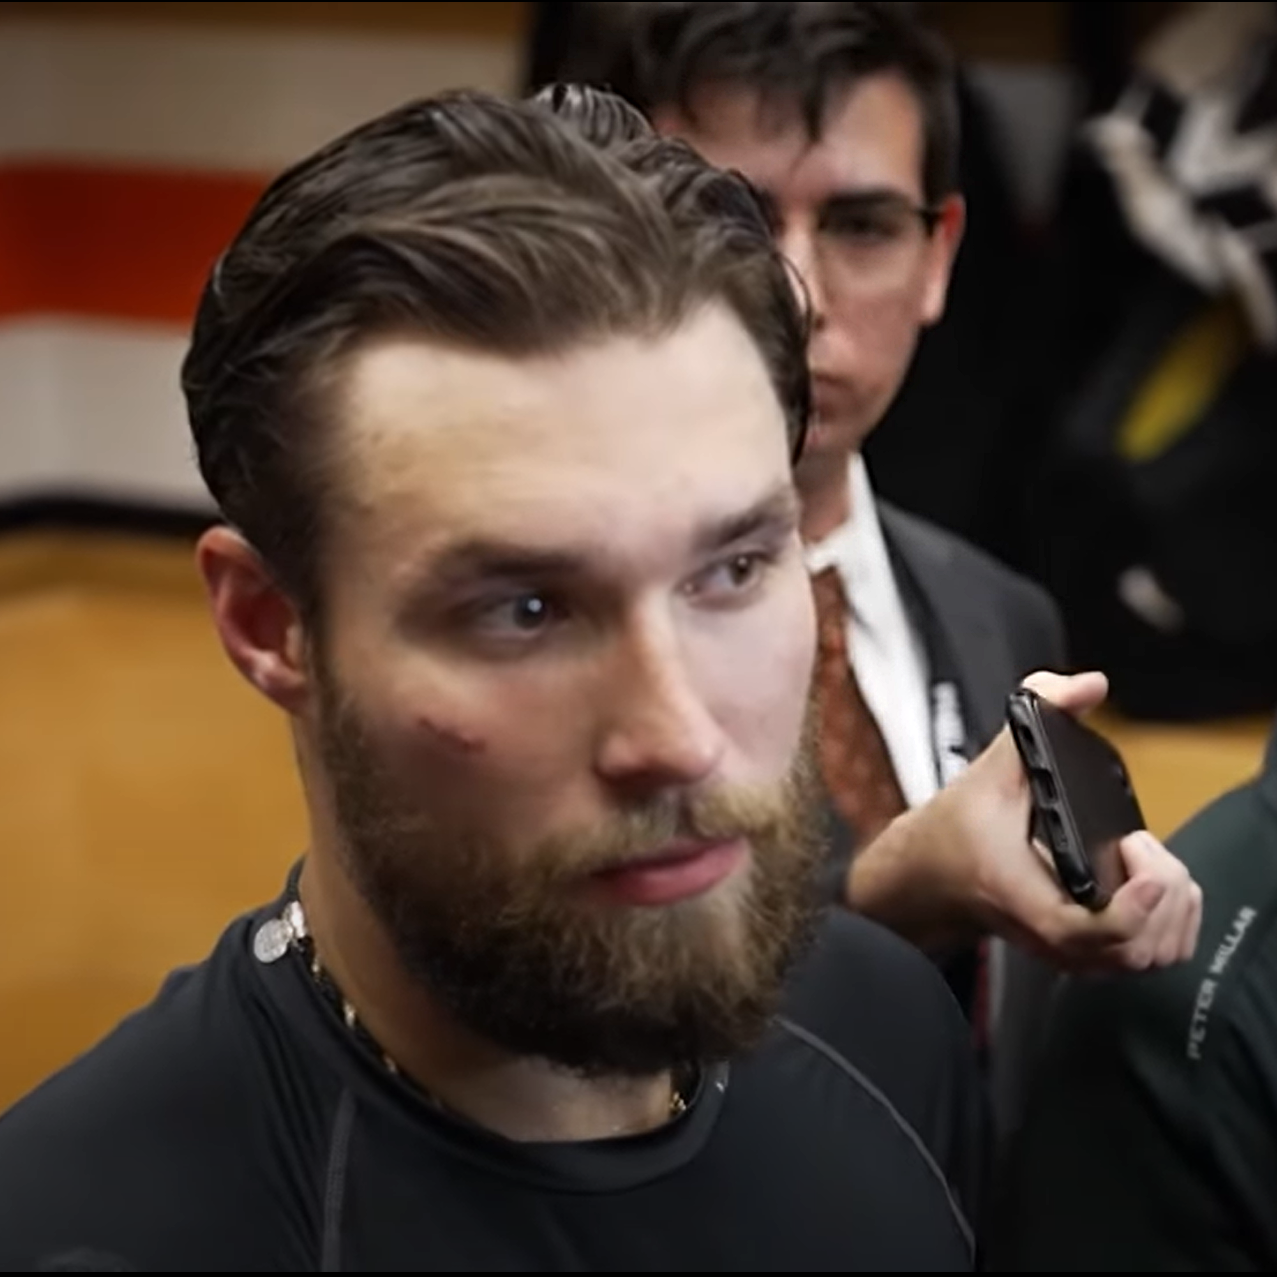 Cody, a white male with brown hair and glasses, wearing a white shirt, dark orange tie, and dark colored blazer, stands behind Philadelphia Flyers defenseman Ivan Provorov during a postgame media scrum in the Philadelphia locker room at Wells Fargo Center in Philadelphia, Pennsylvania.